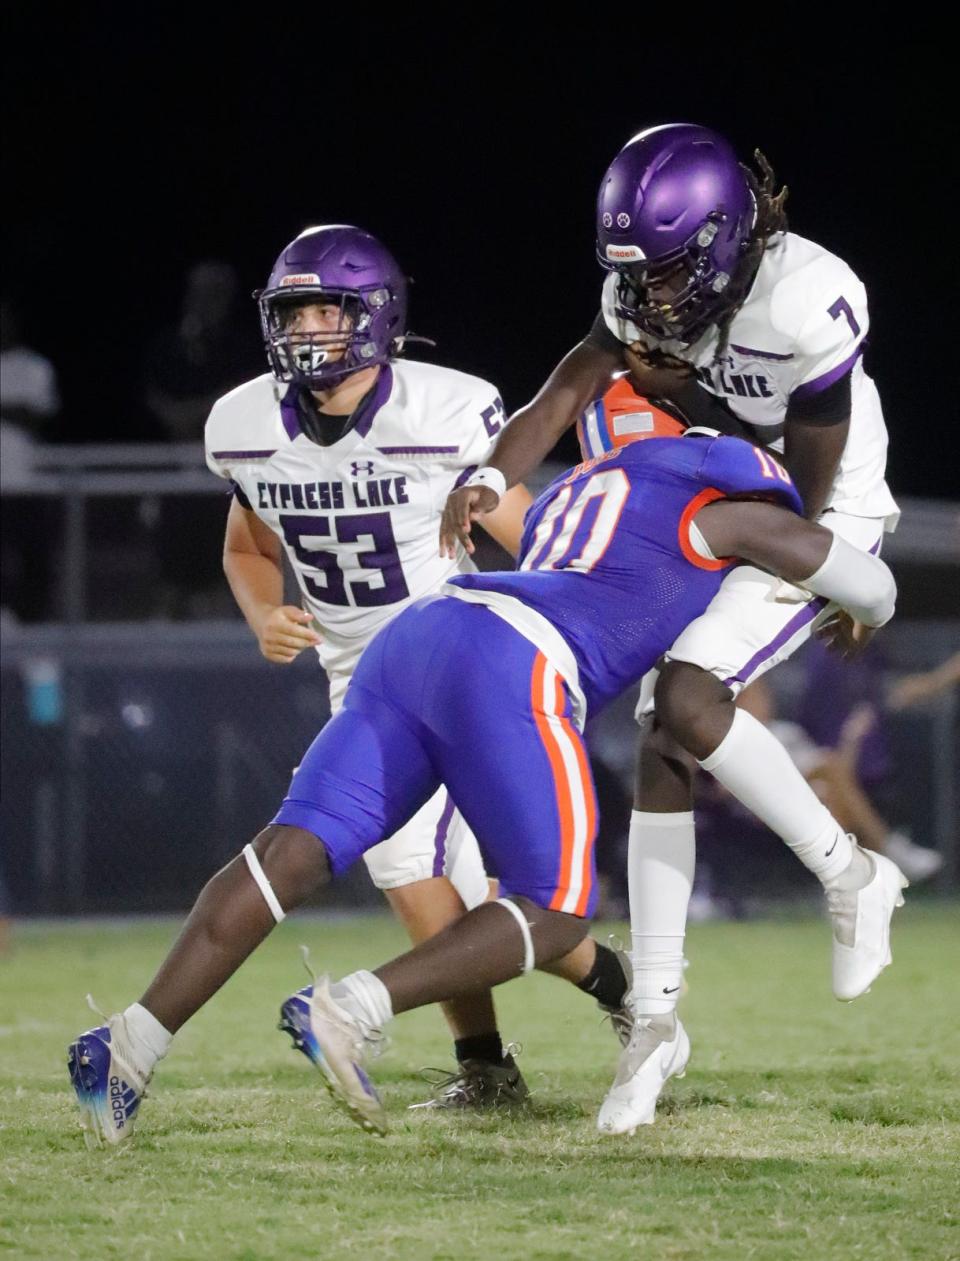 Cape Coral linebacker Derrick Oge tackles Cypress Lake quarterback Tyrese Nelson. Cape Coral High School hosted Cypress Lake for a Friday night football showdown September 15, 2023. Ricardo Rolon/USA TODAY NETWORK-FLORIDA